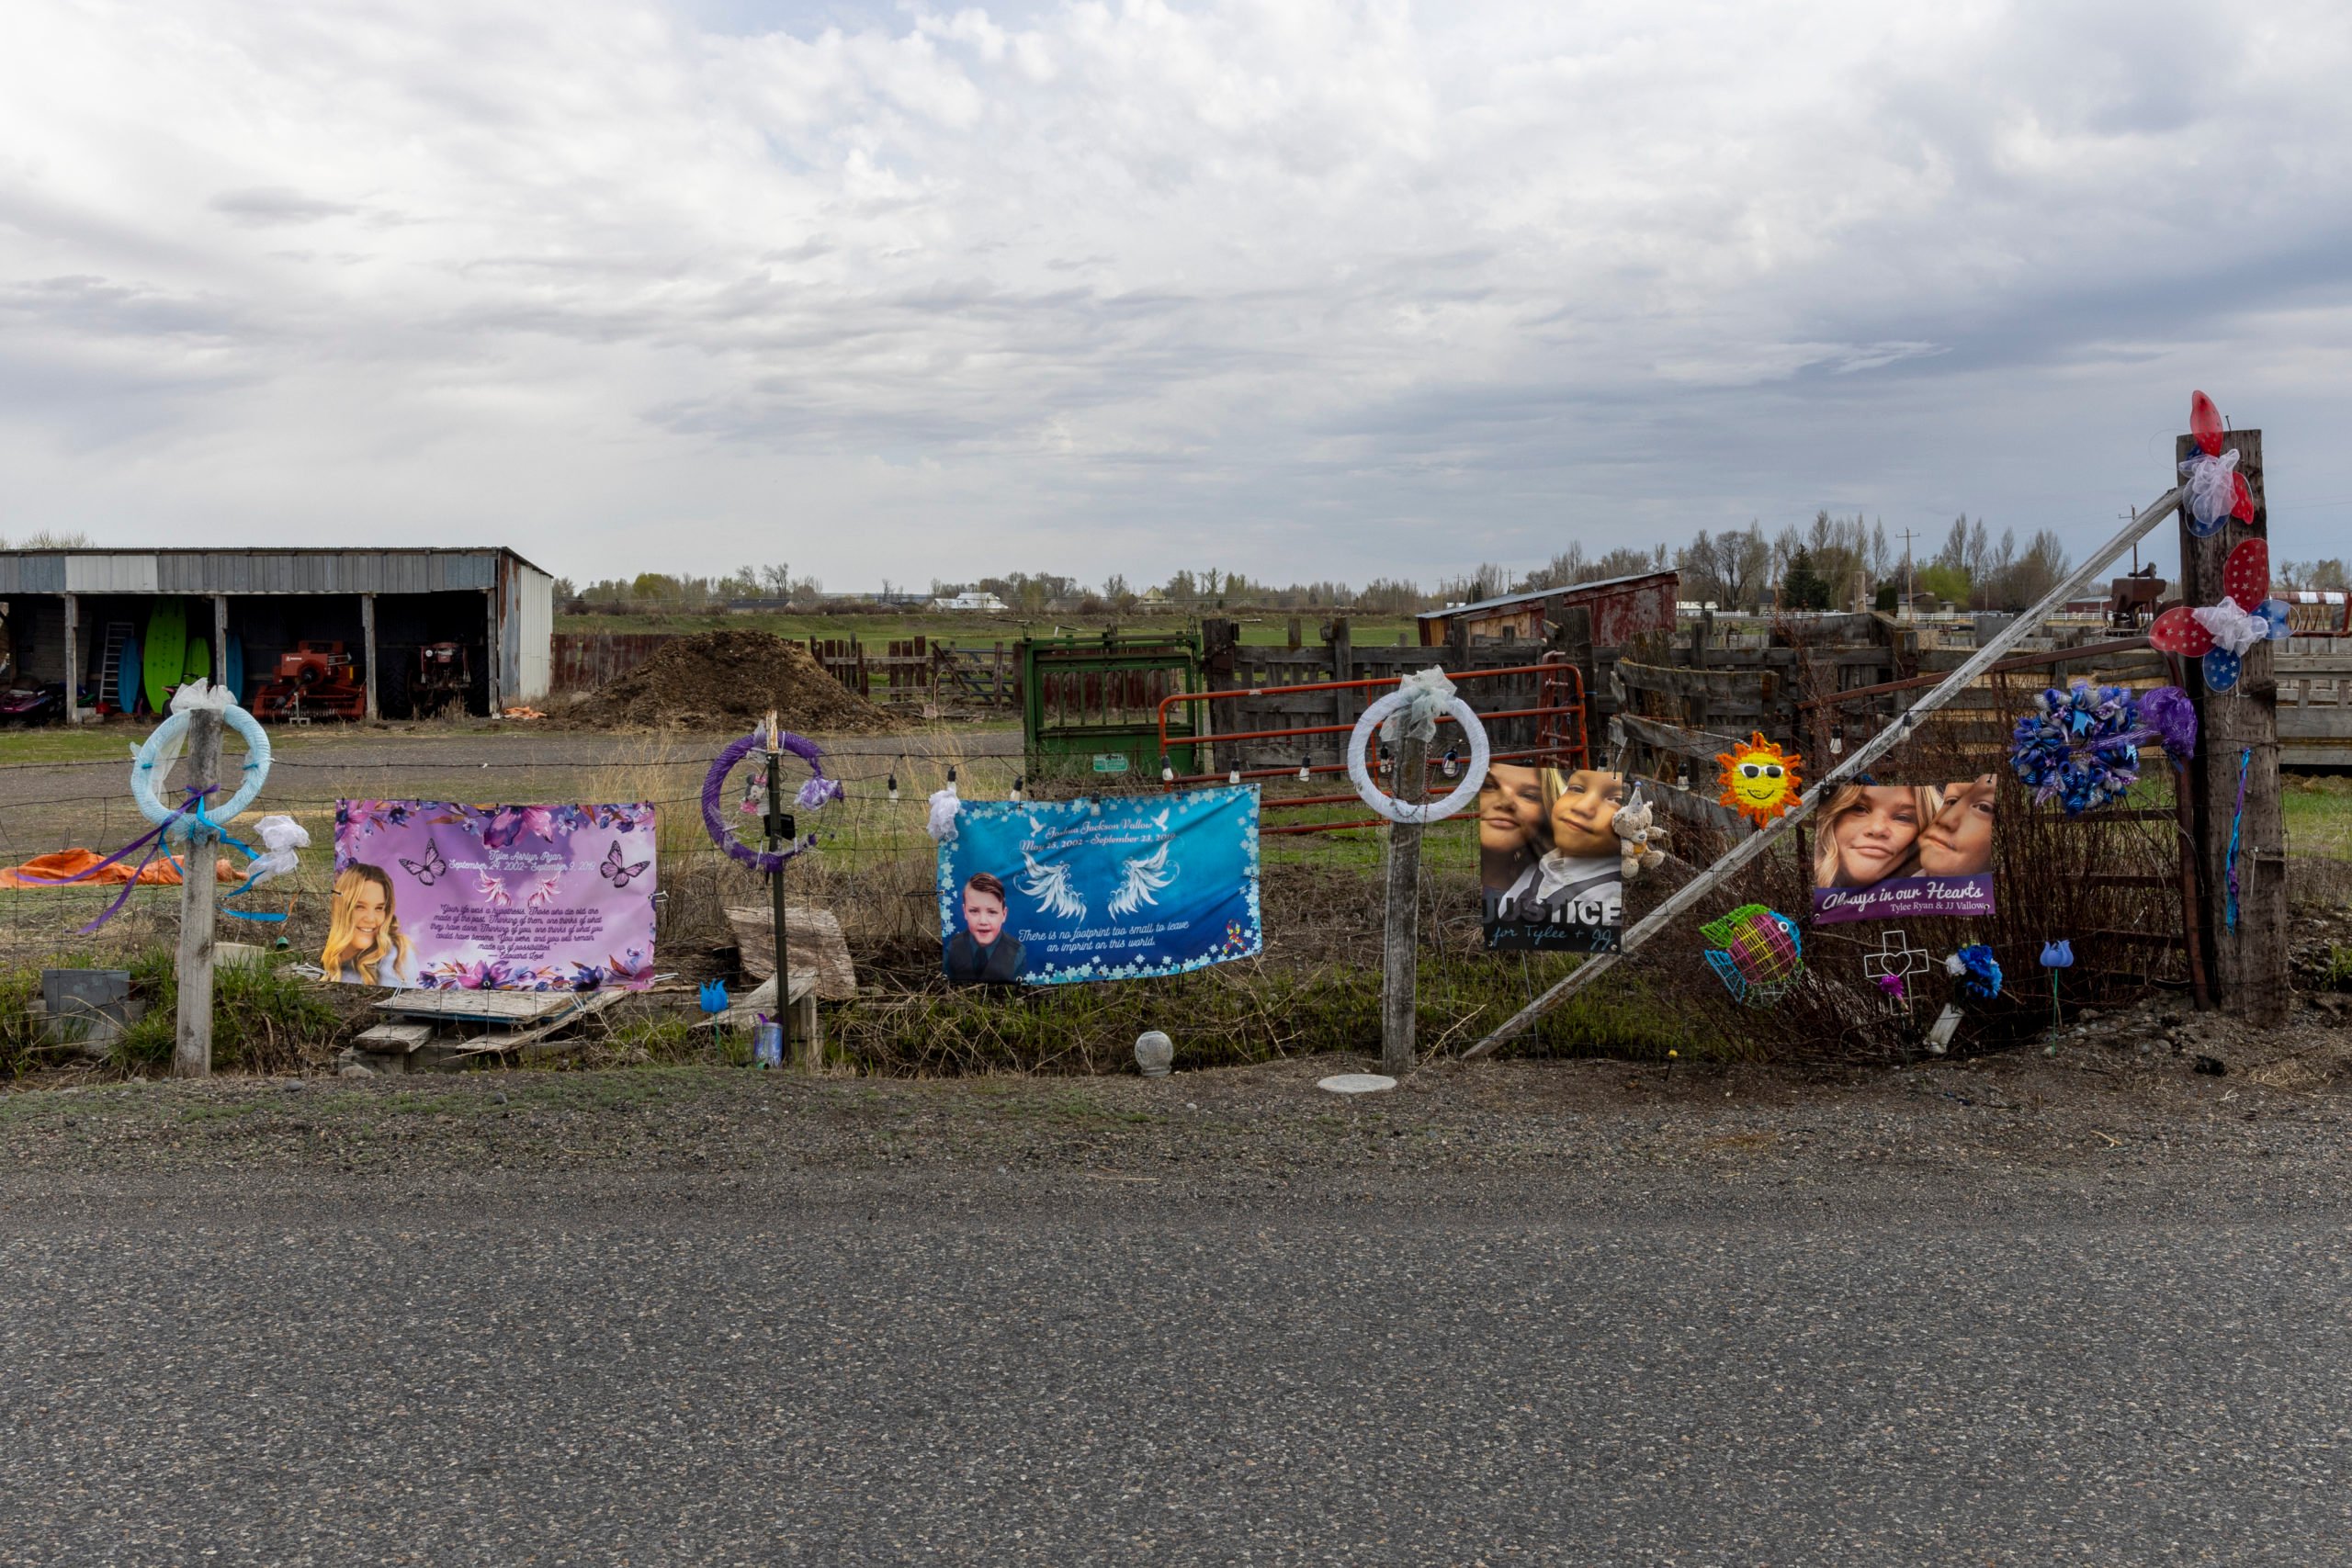 REXBURG, IDAHO - MAY 10: Banners showing Tylee Ryan and her brother J.J. Vallow are seen on a fence set up as a memorial near where her body was found on May 10, 2023 in Rexburg, Idaho. Lori Vallow Daybell faces charges of murder, conspiracy and grand theft in connection to the deaths of two of her children — Tylee Ryan and J.J. Vallow — as well as Tammy Daybell, the previous wife of her husband Chad Daybell. (Photo by Natalie Behring/Getty Images)